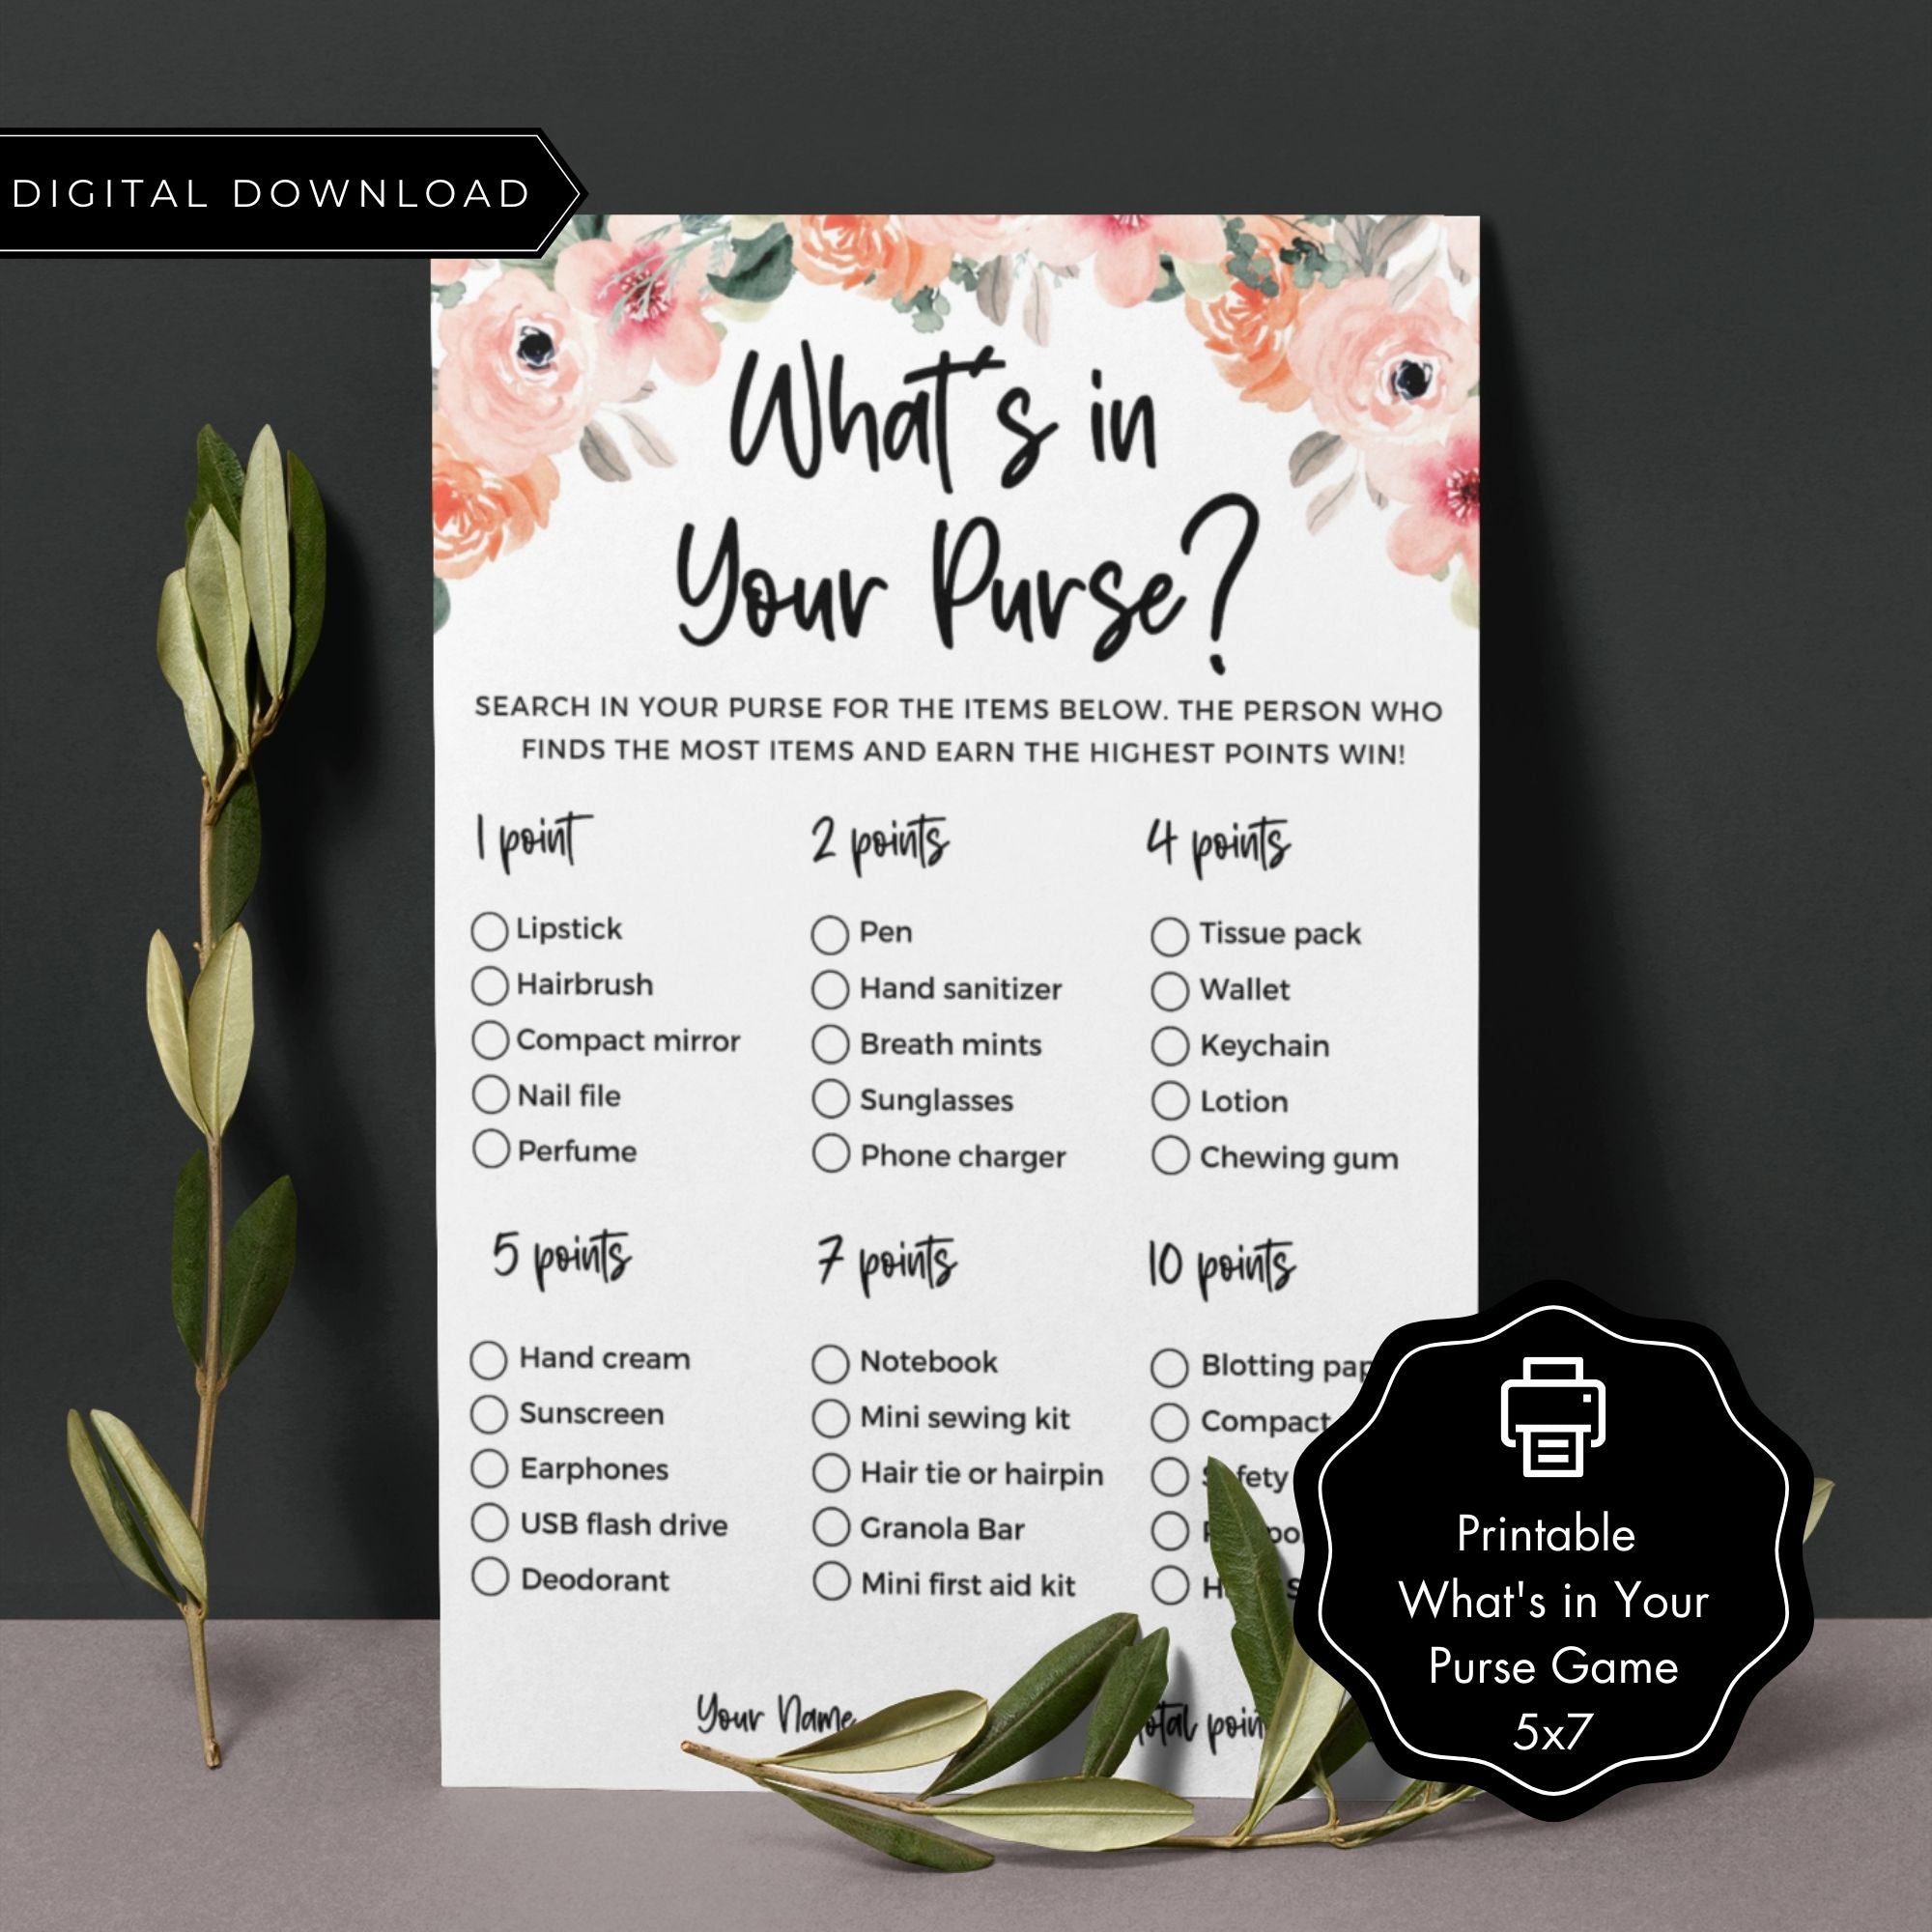 Amazon.com: Hadley Designs 25 Gold Whats in Your Purse Bridal Wedding Shower  or Bachelorette Party Game Item Cards, Engagement Activities Ideas Funny  Rehearsal Dinner Supplies and Decoration Favors for Guests : Home